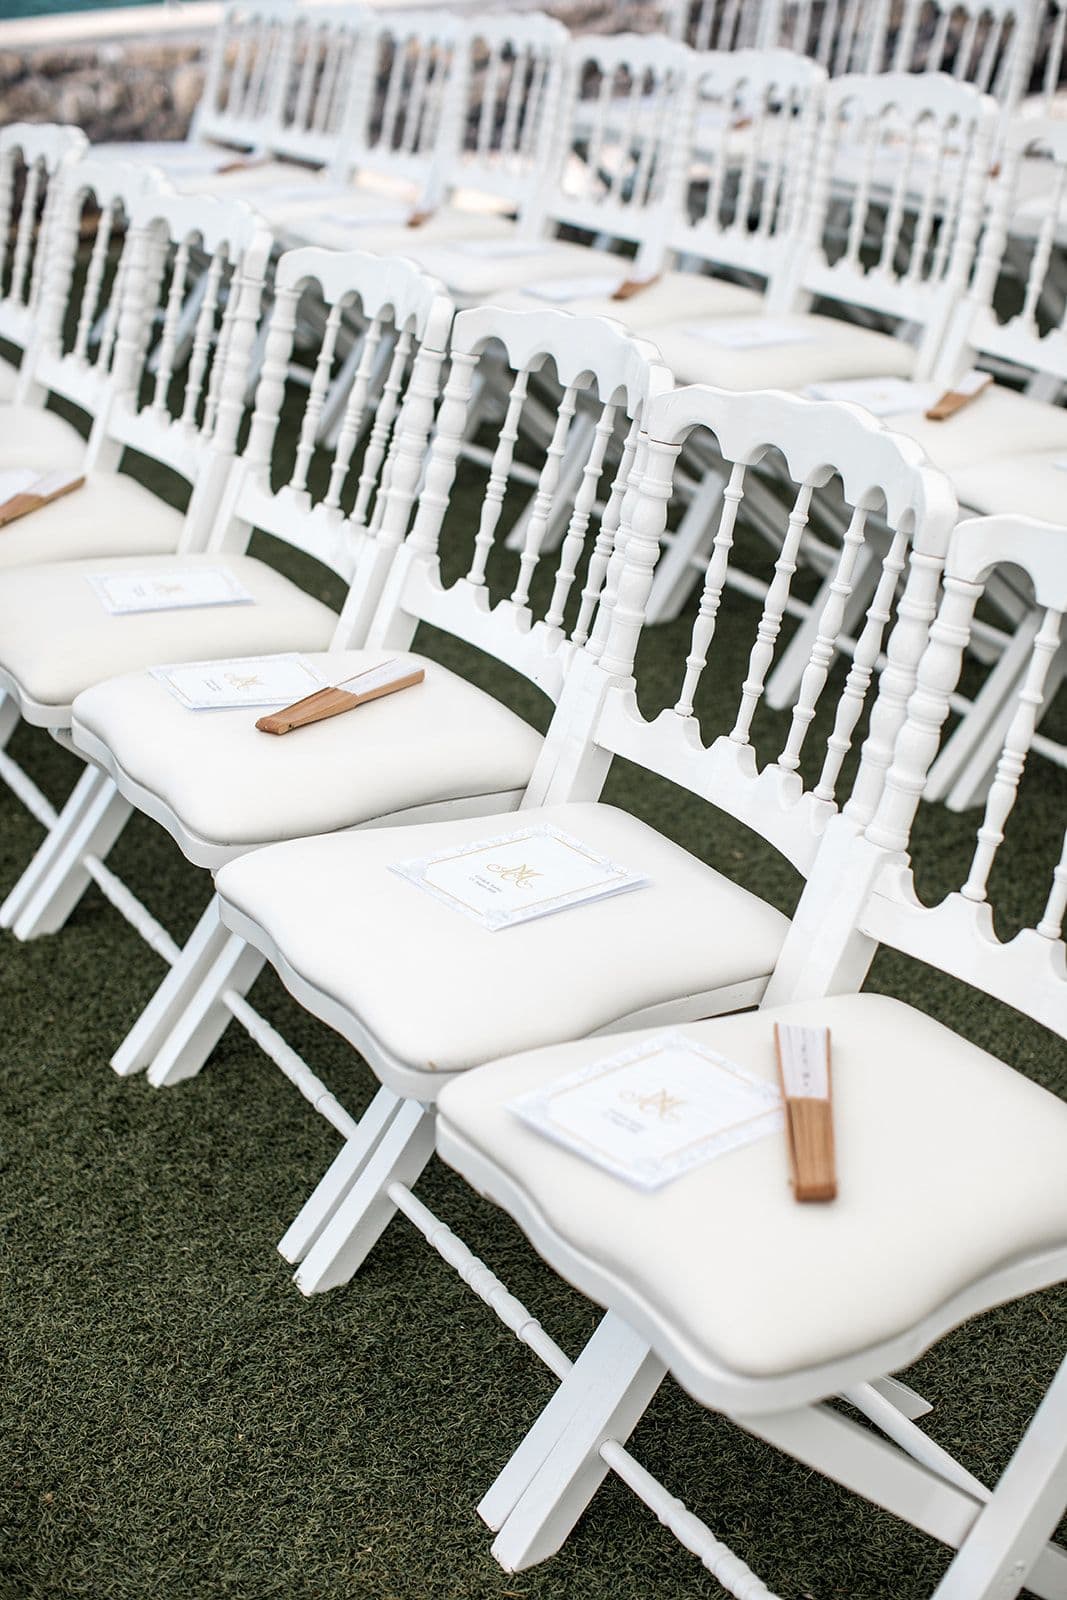 White chairs with fans for guests during wedding ceremony